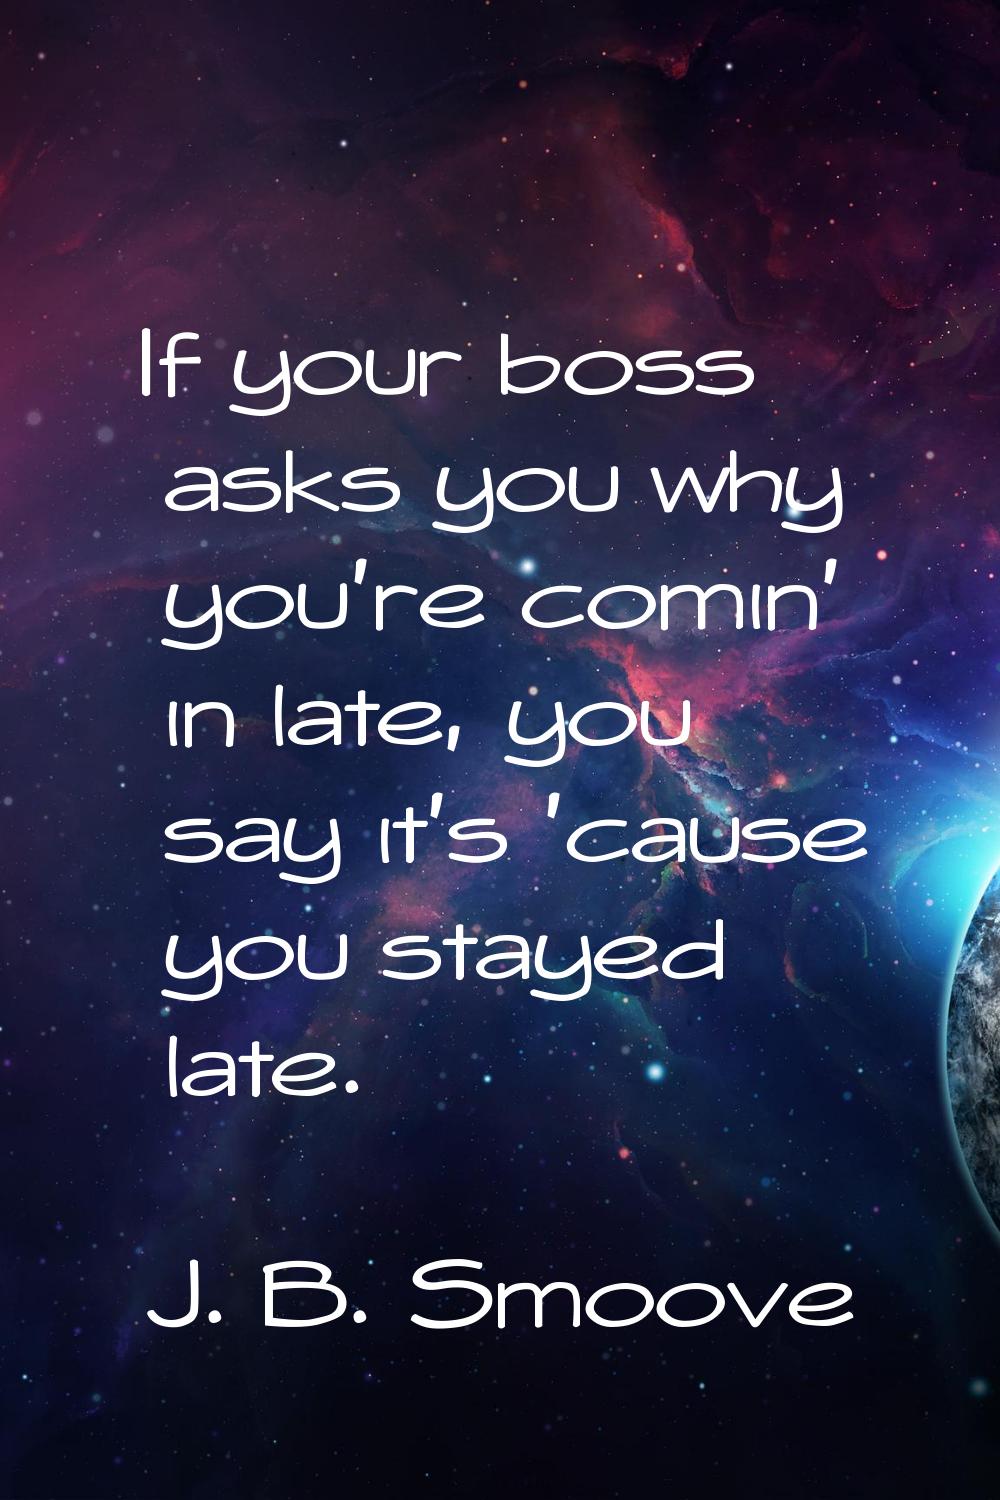 If your boss asks you why you're comin' in late, you say it's 'cause you stayed late.